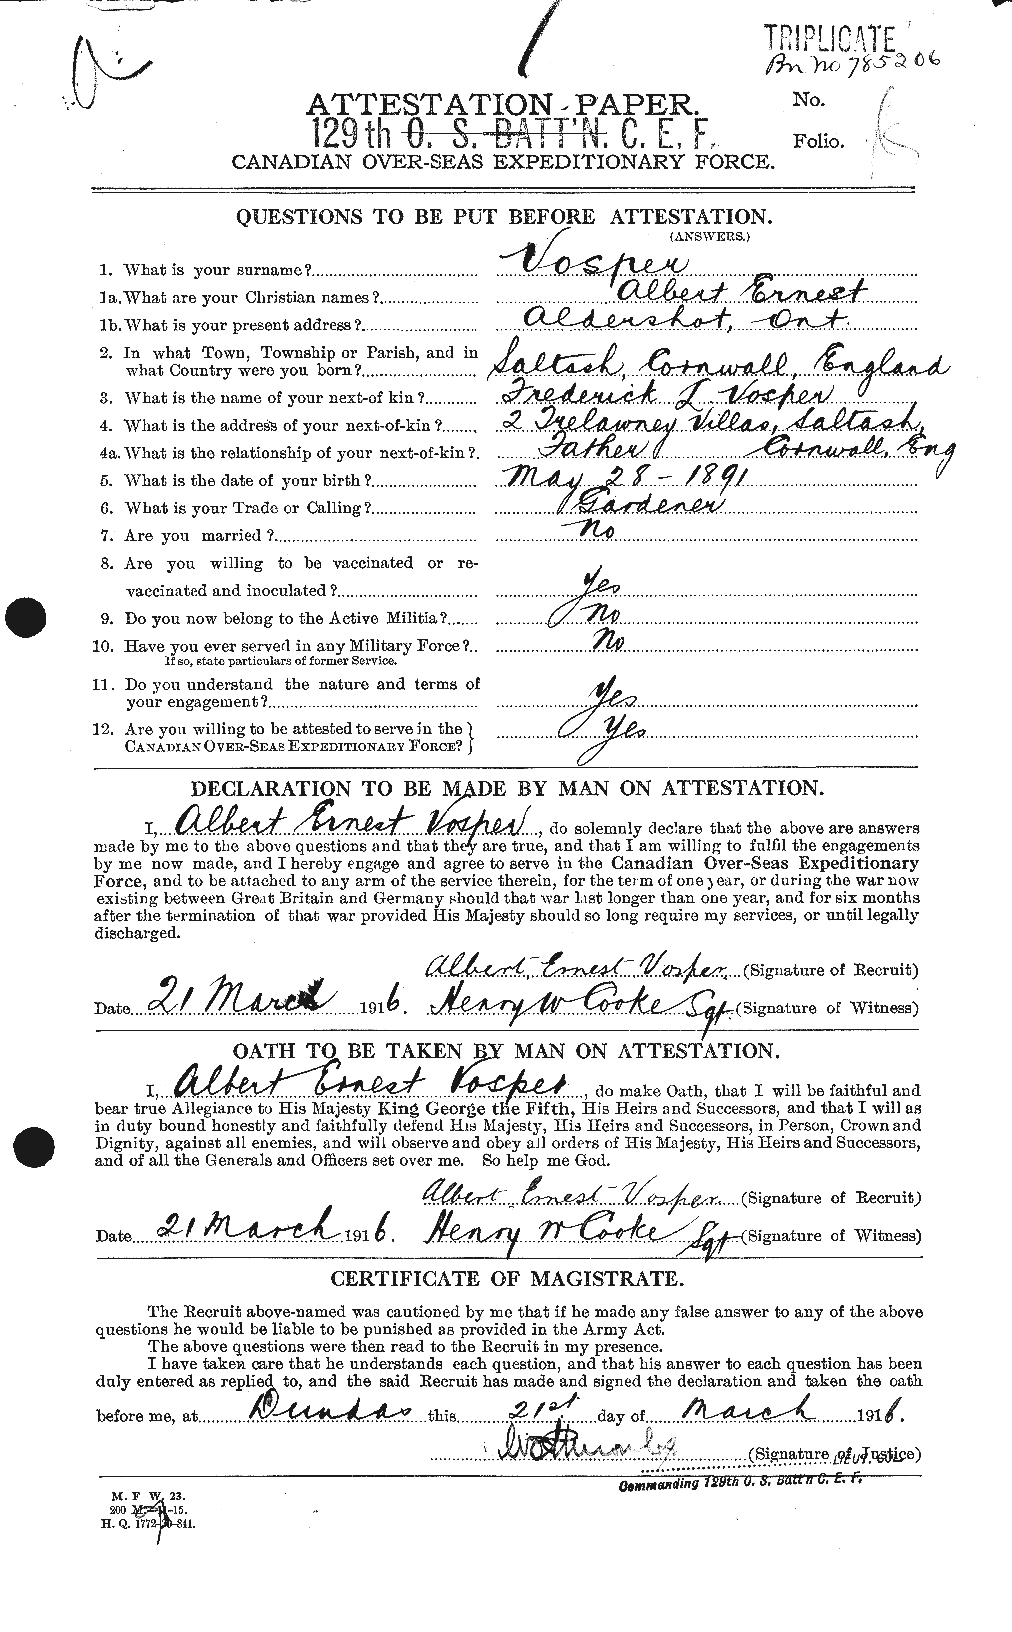 Personnel Records of the First World War - CEF 652413a